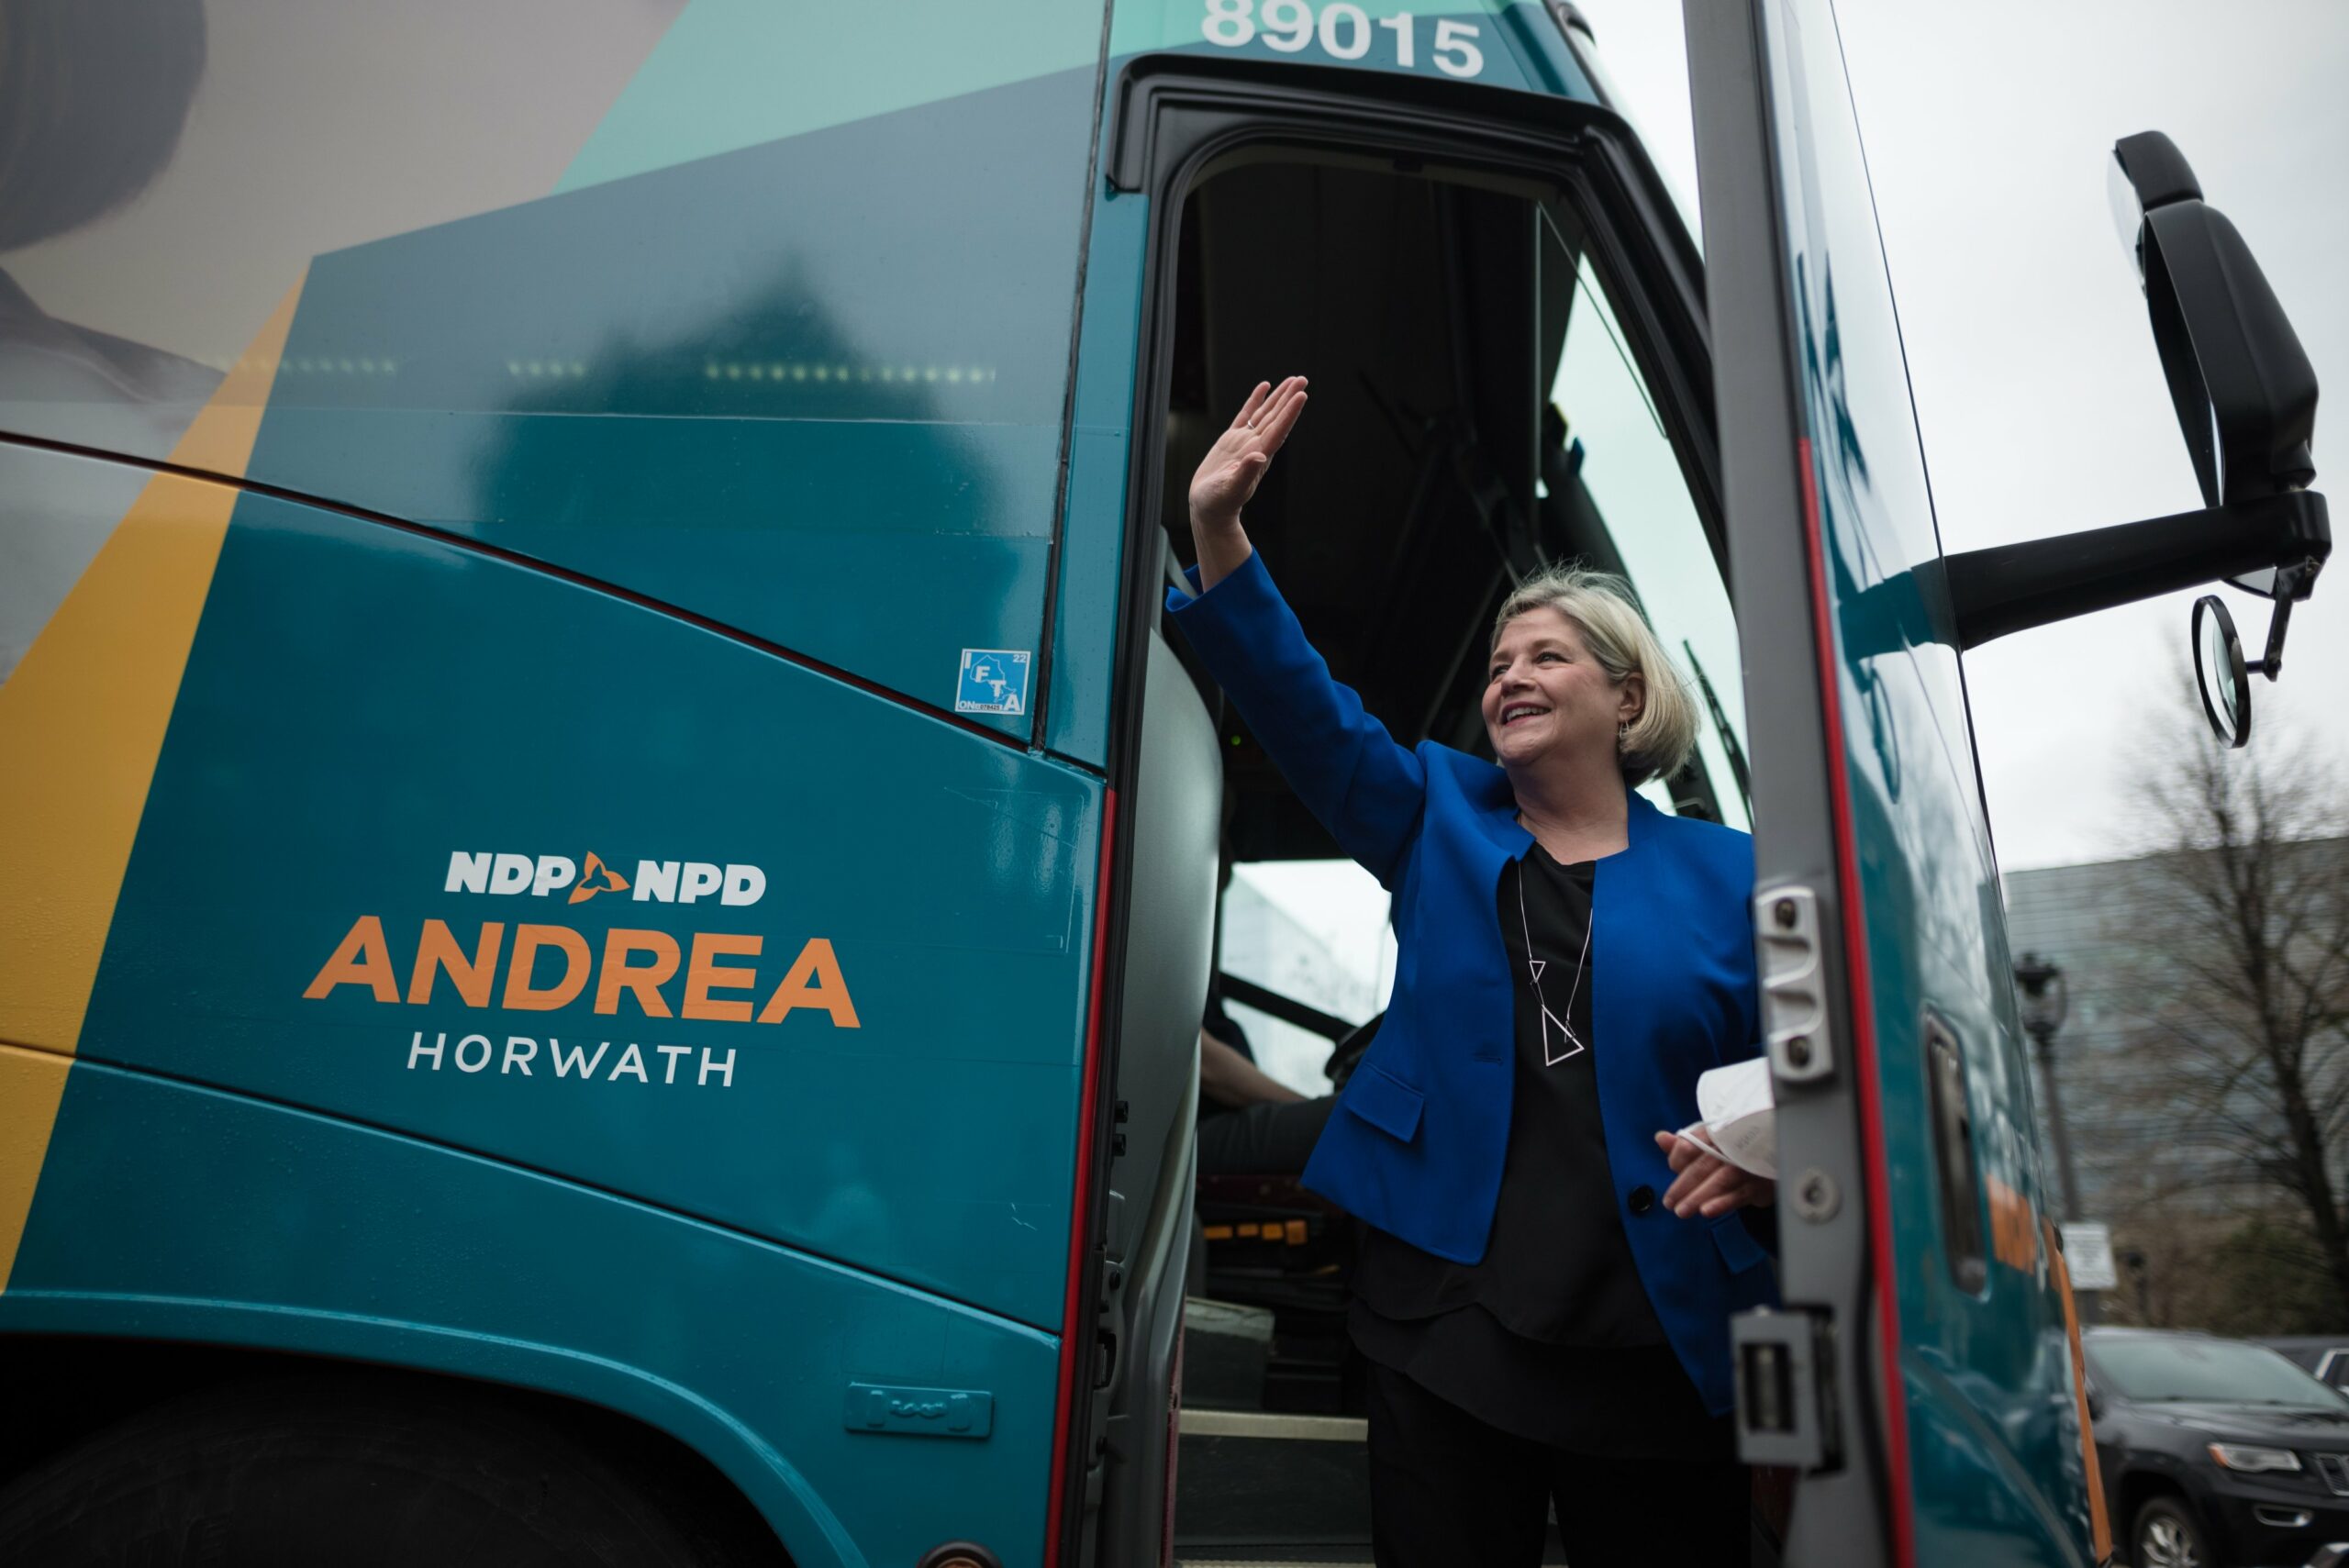 It might be now or never for Andrea Horwath